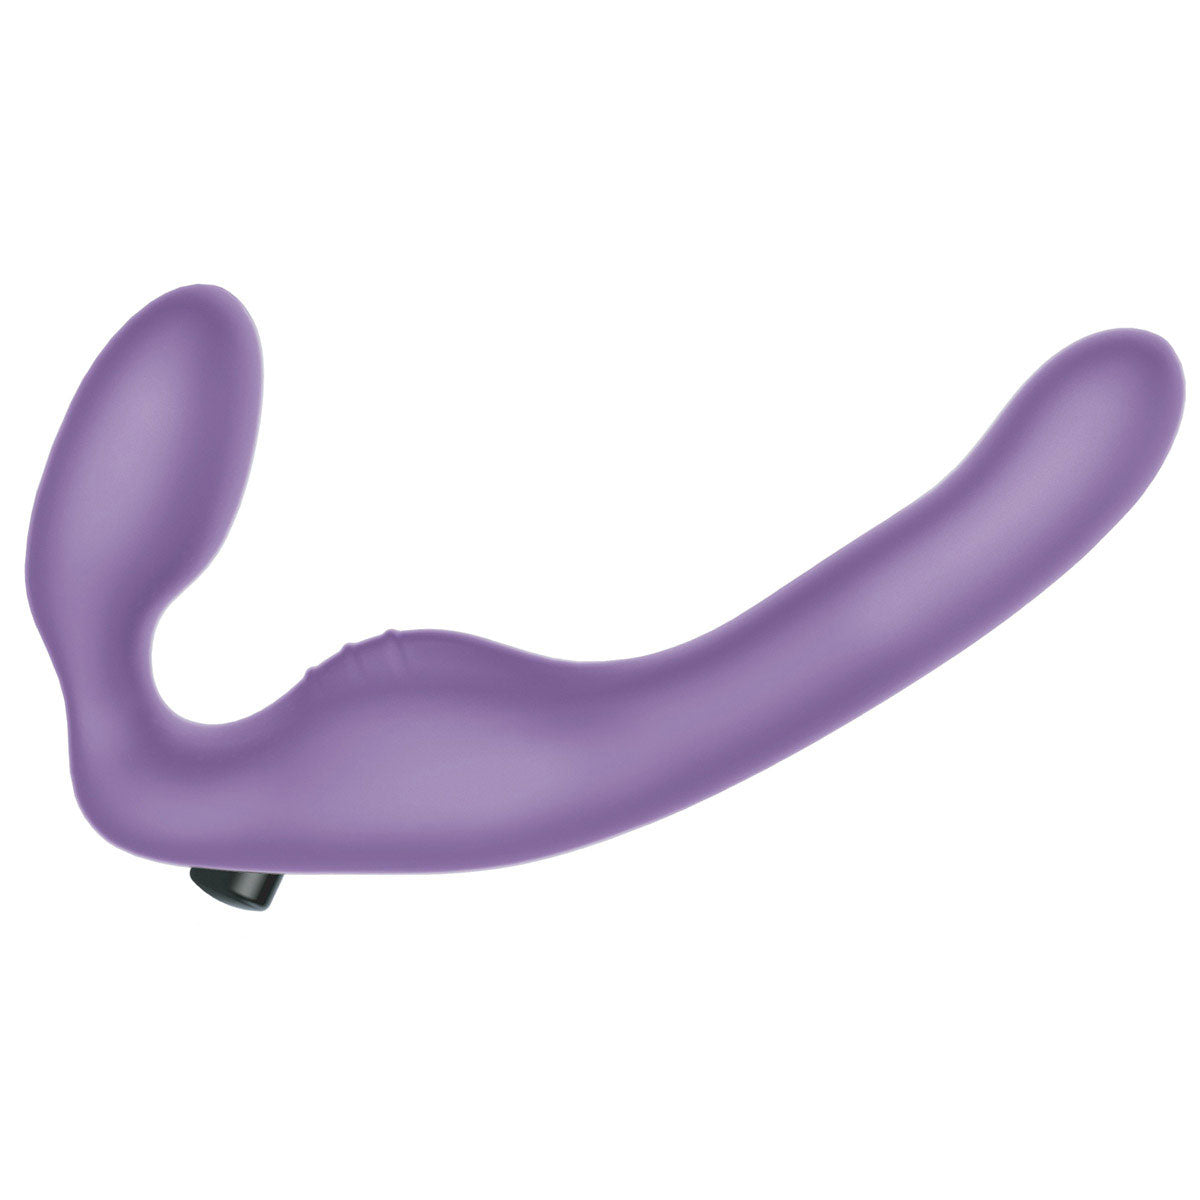 Wet for Her Union Strapless Double Dil - Medium - Purple